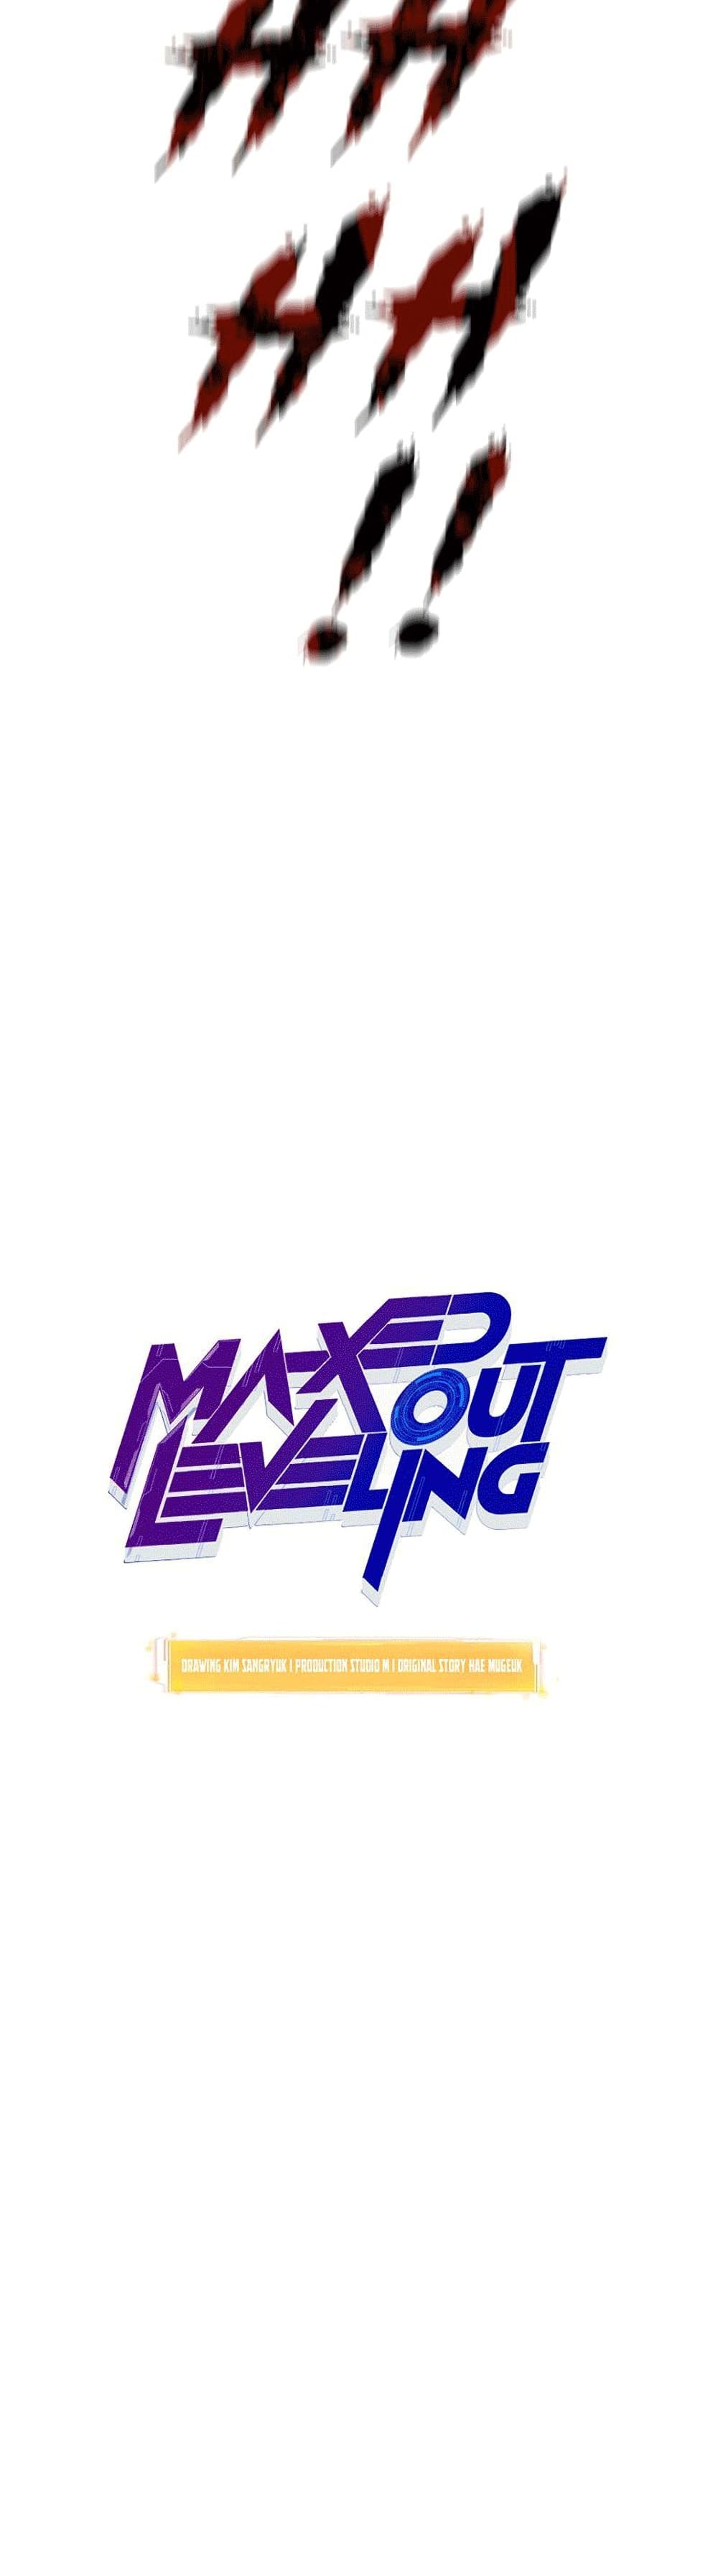 Maxed Out Leveling 43-43